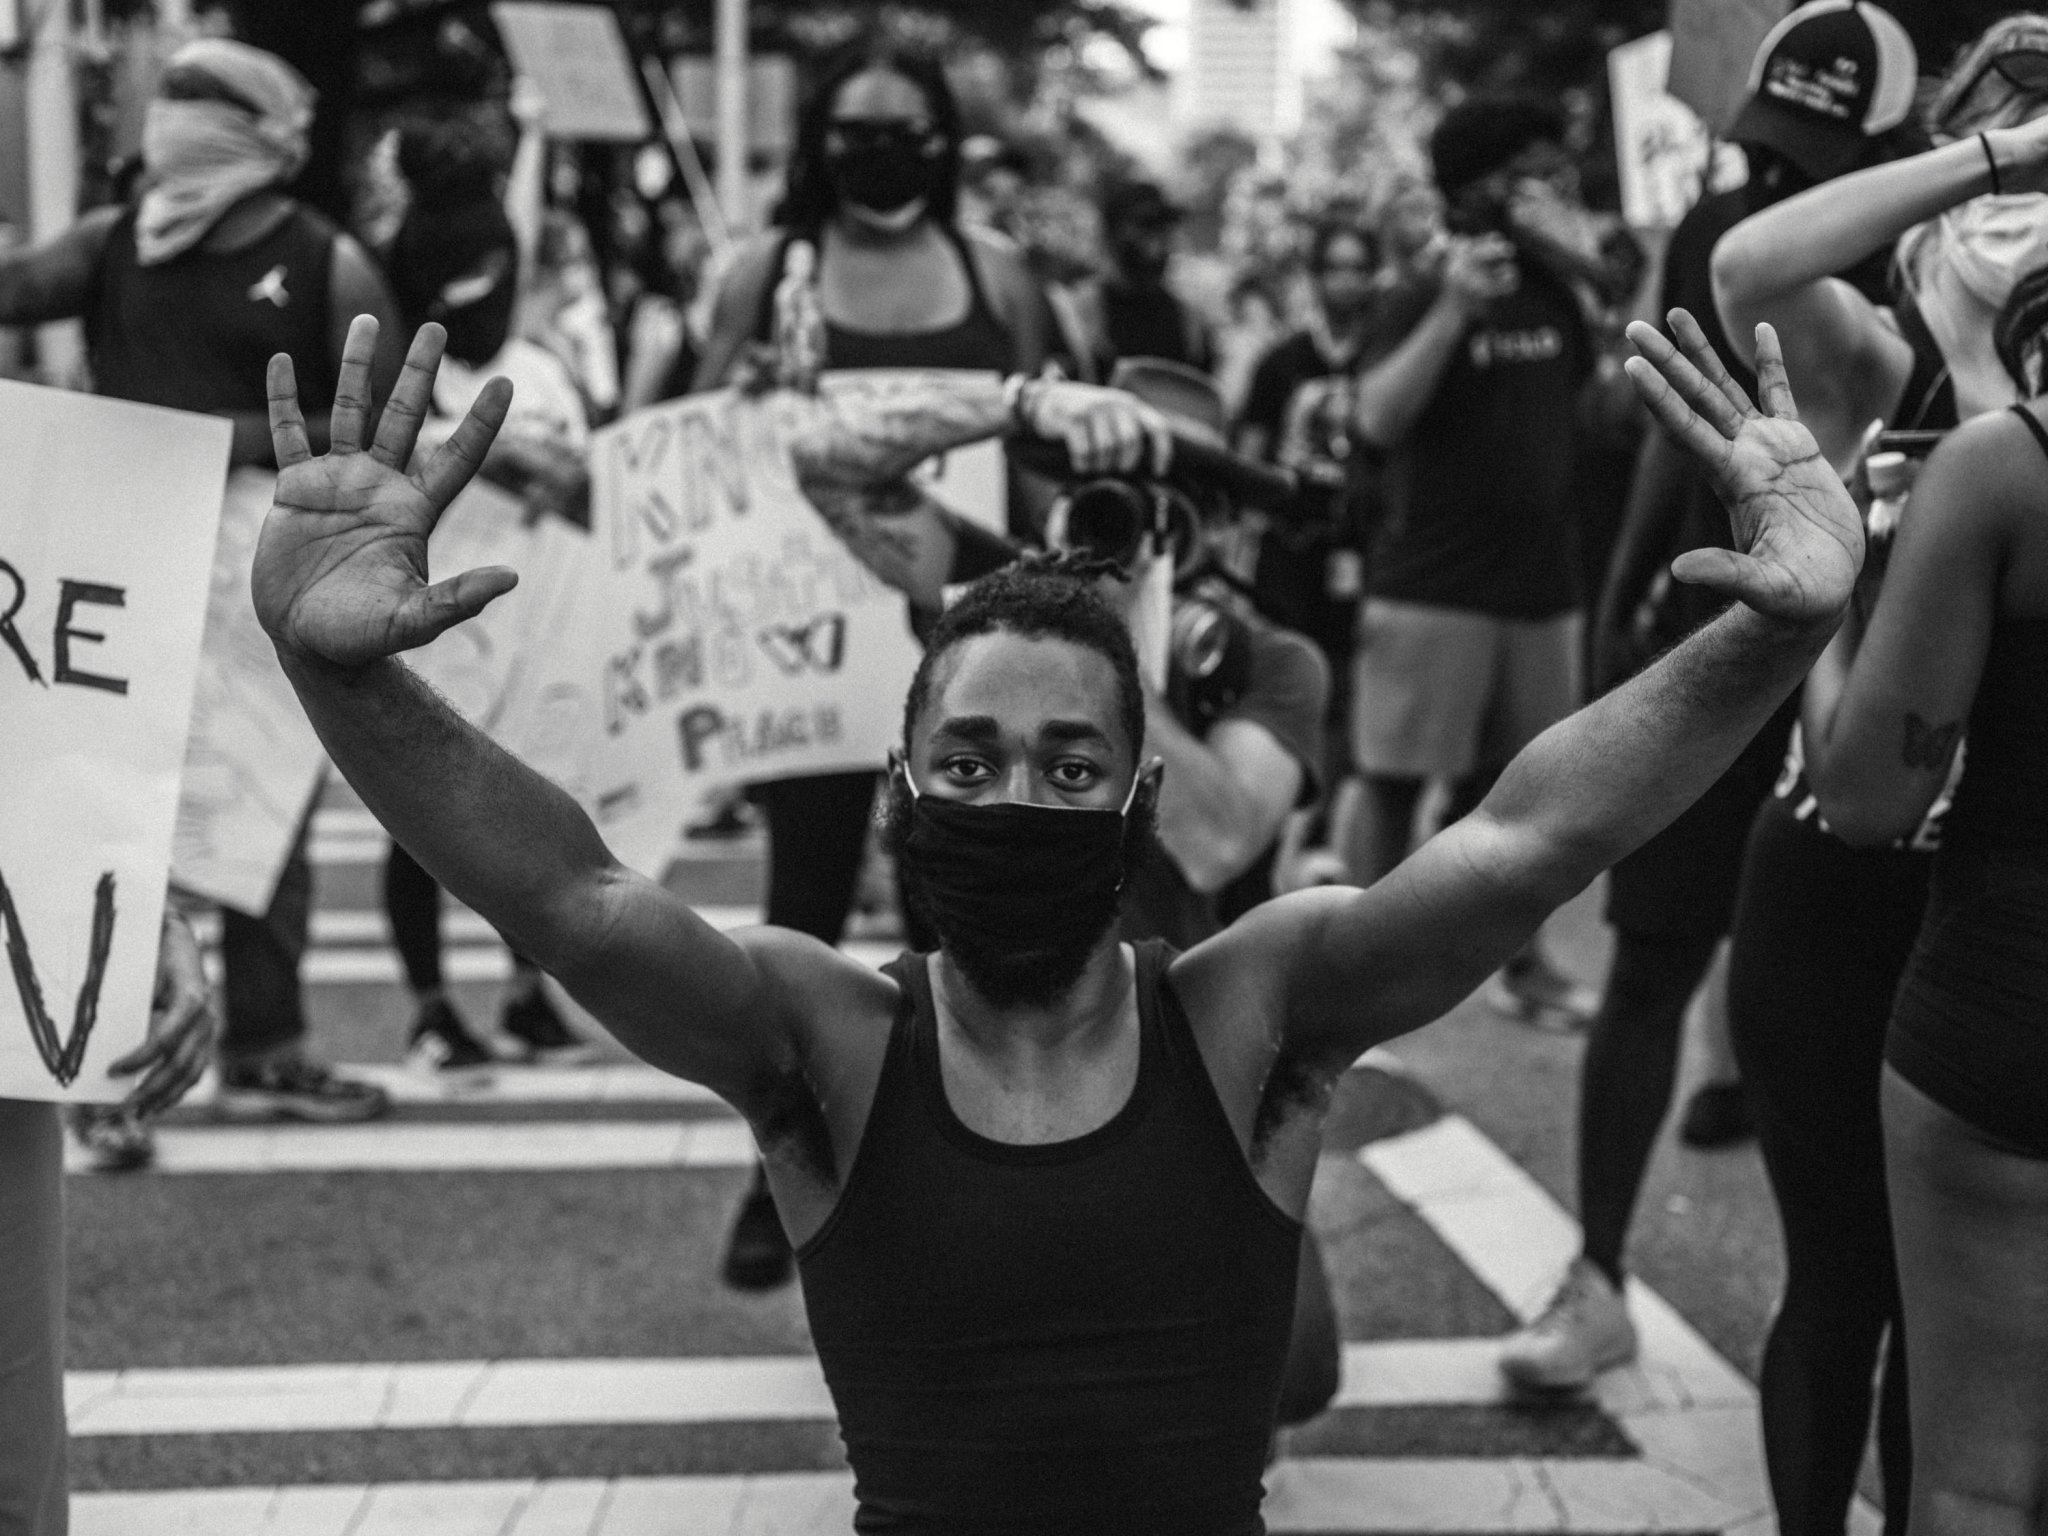 Lynsey Weatherspoon Shares Her Strong Feelings on Photographing BLM